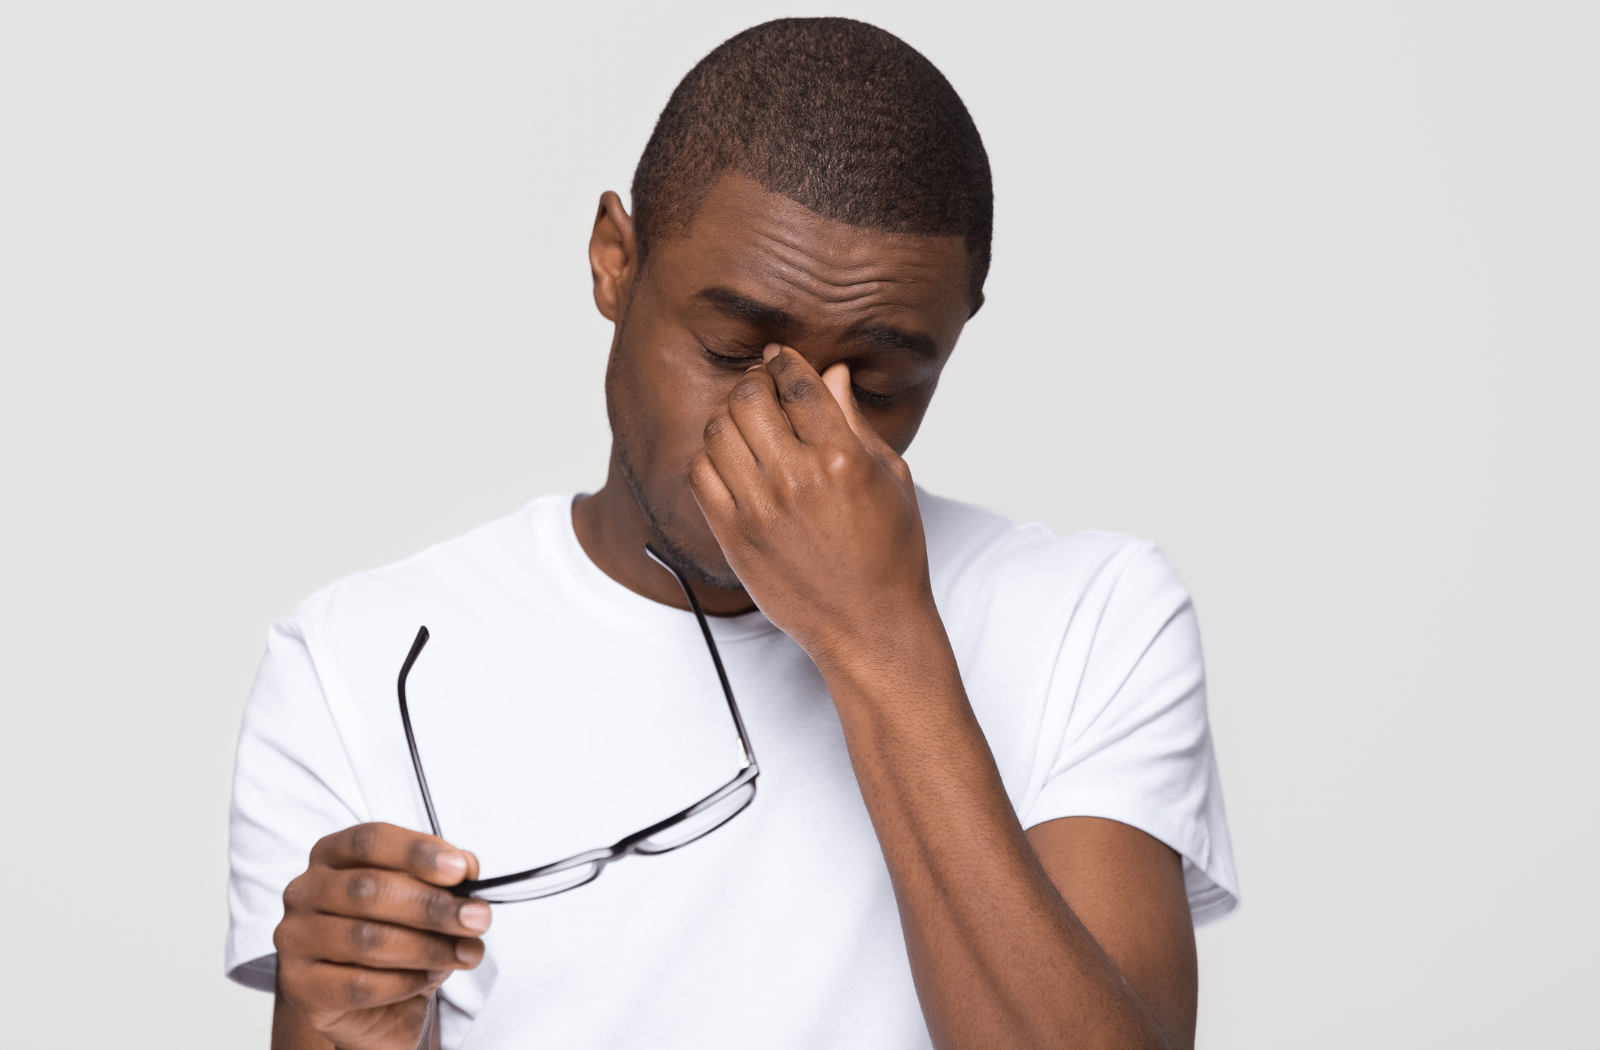 A man taking off his glasses and rubbing his eye due to irritated eyes